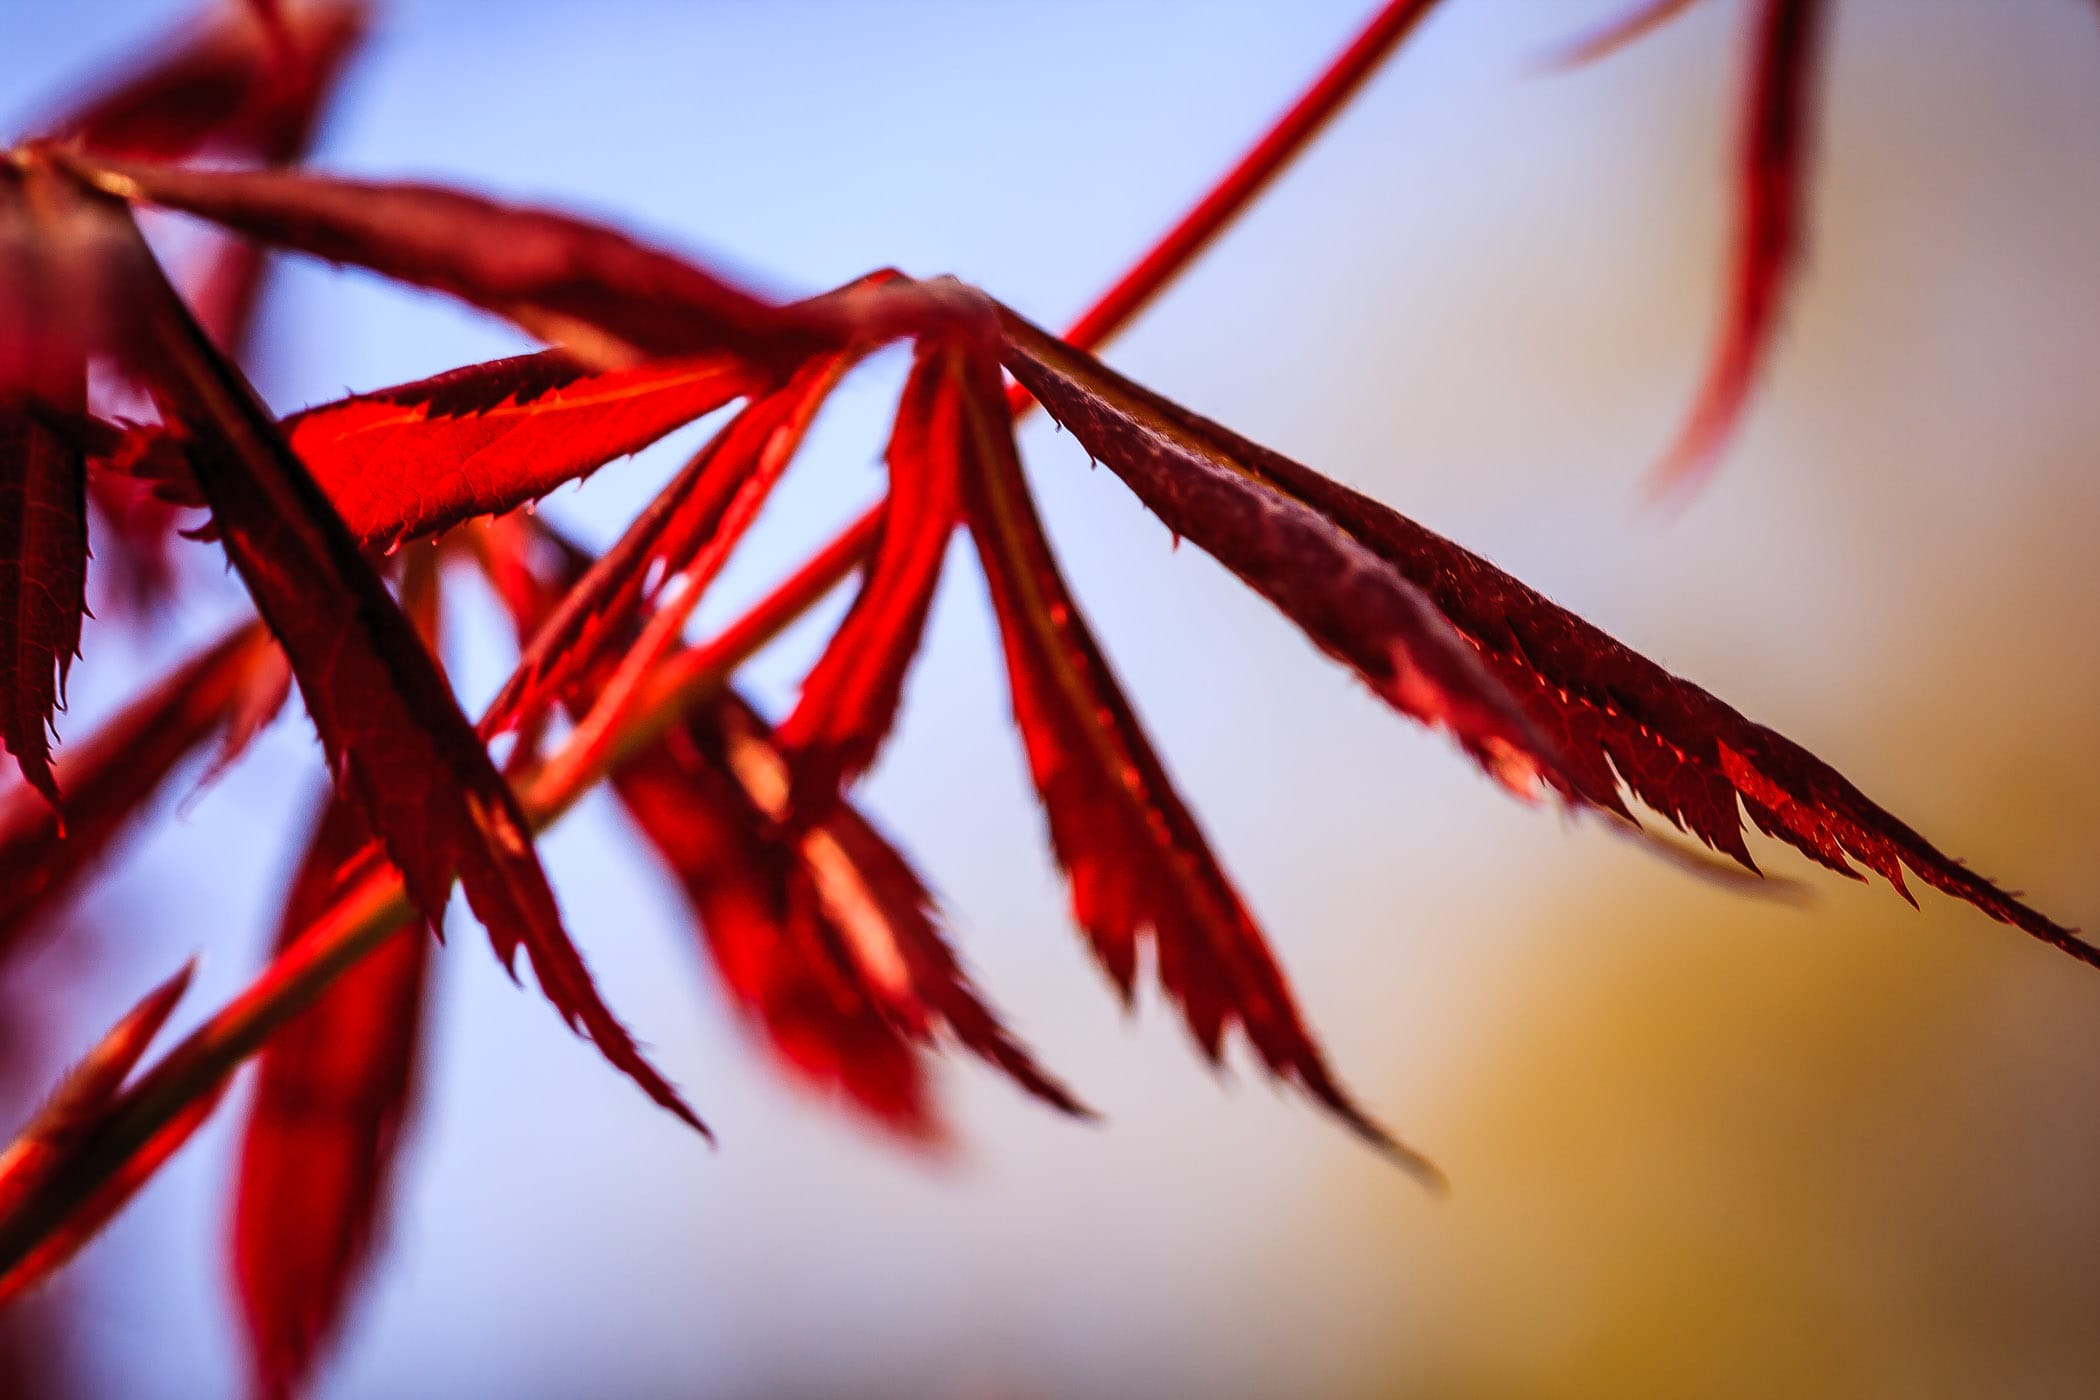 Japanese maple tree leaves at my mother's house, Tyler, Texas.